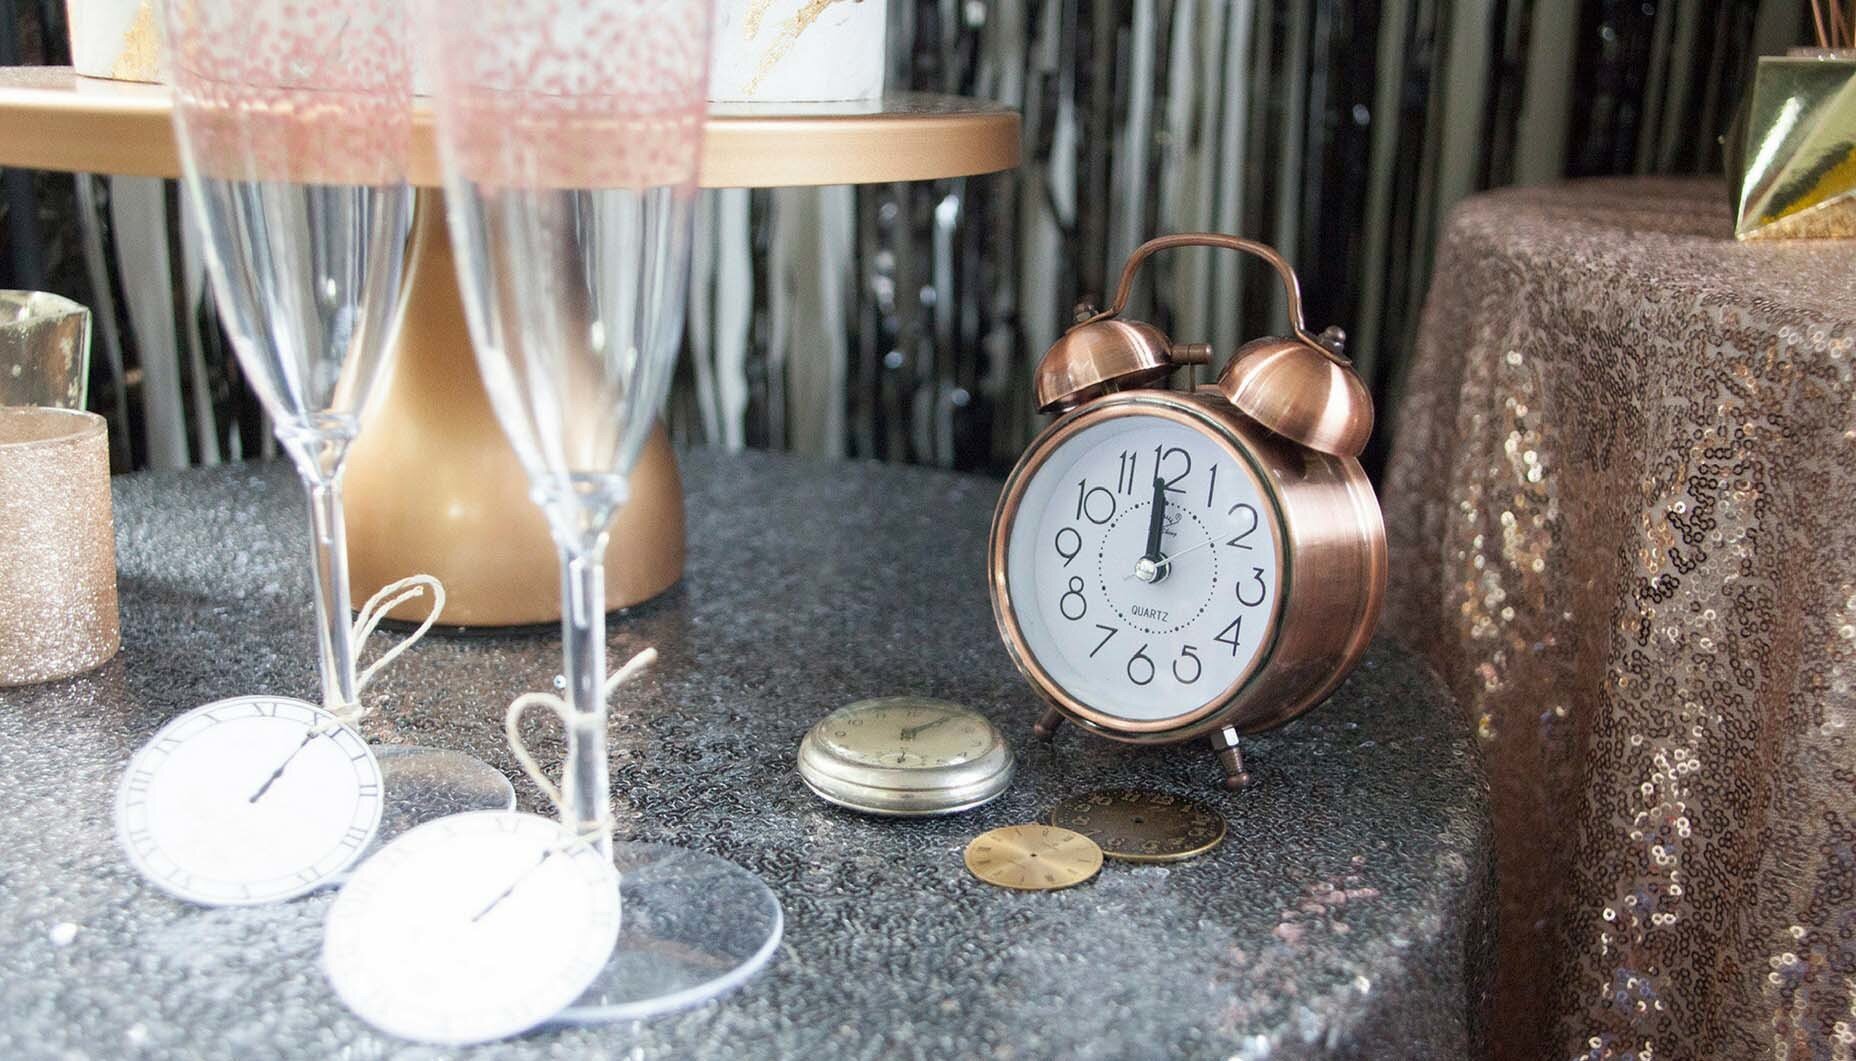 Mixed metallic NYE party inspiration - Vintage Time Pieces - Get more New Year’s Eve decor ideas now at minteventdesign.com!